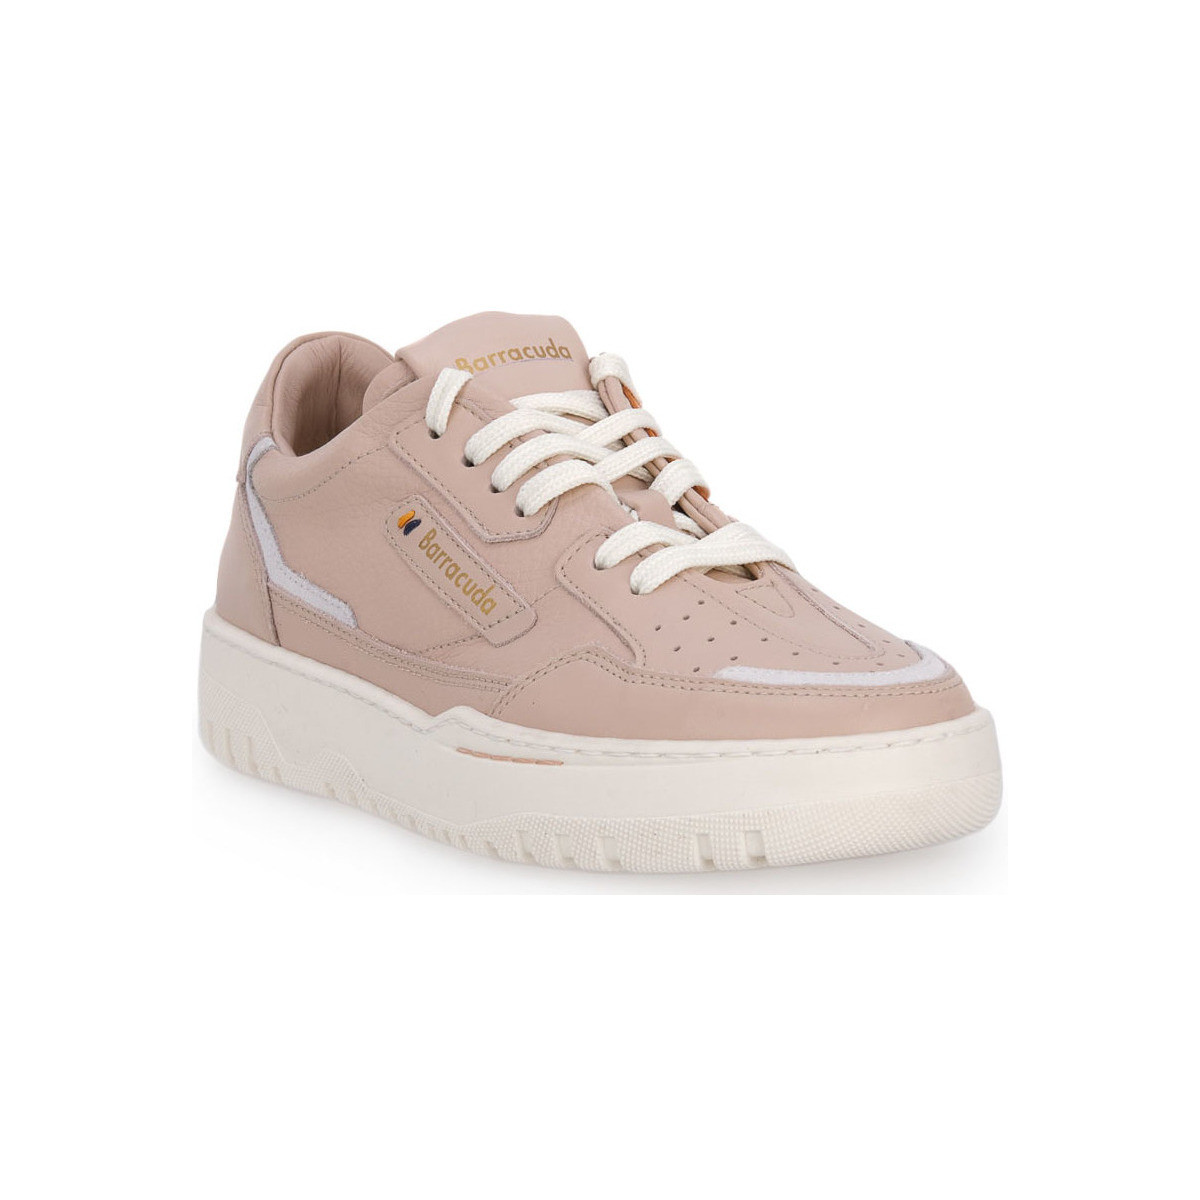 Chaussures Femme Continuer mes achats CIPRIA Rose